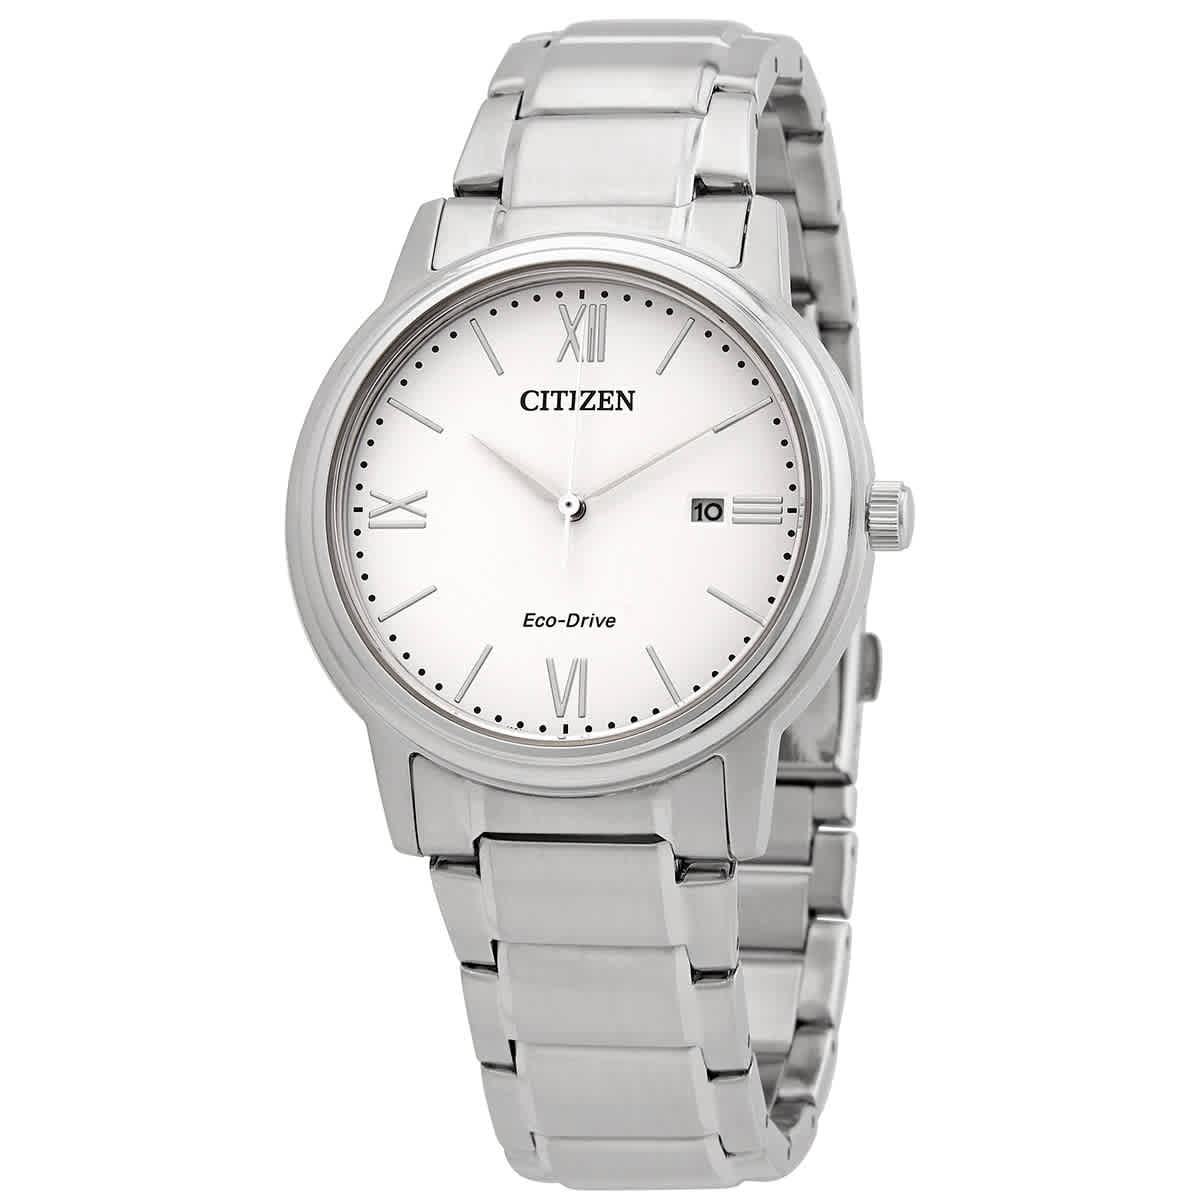 Citizen Eco-Drive White Dial Stainless Steel Men's Watch AW1670-82A ...